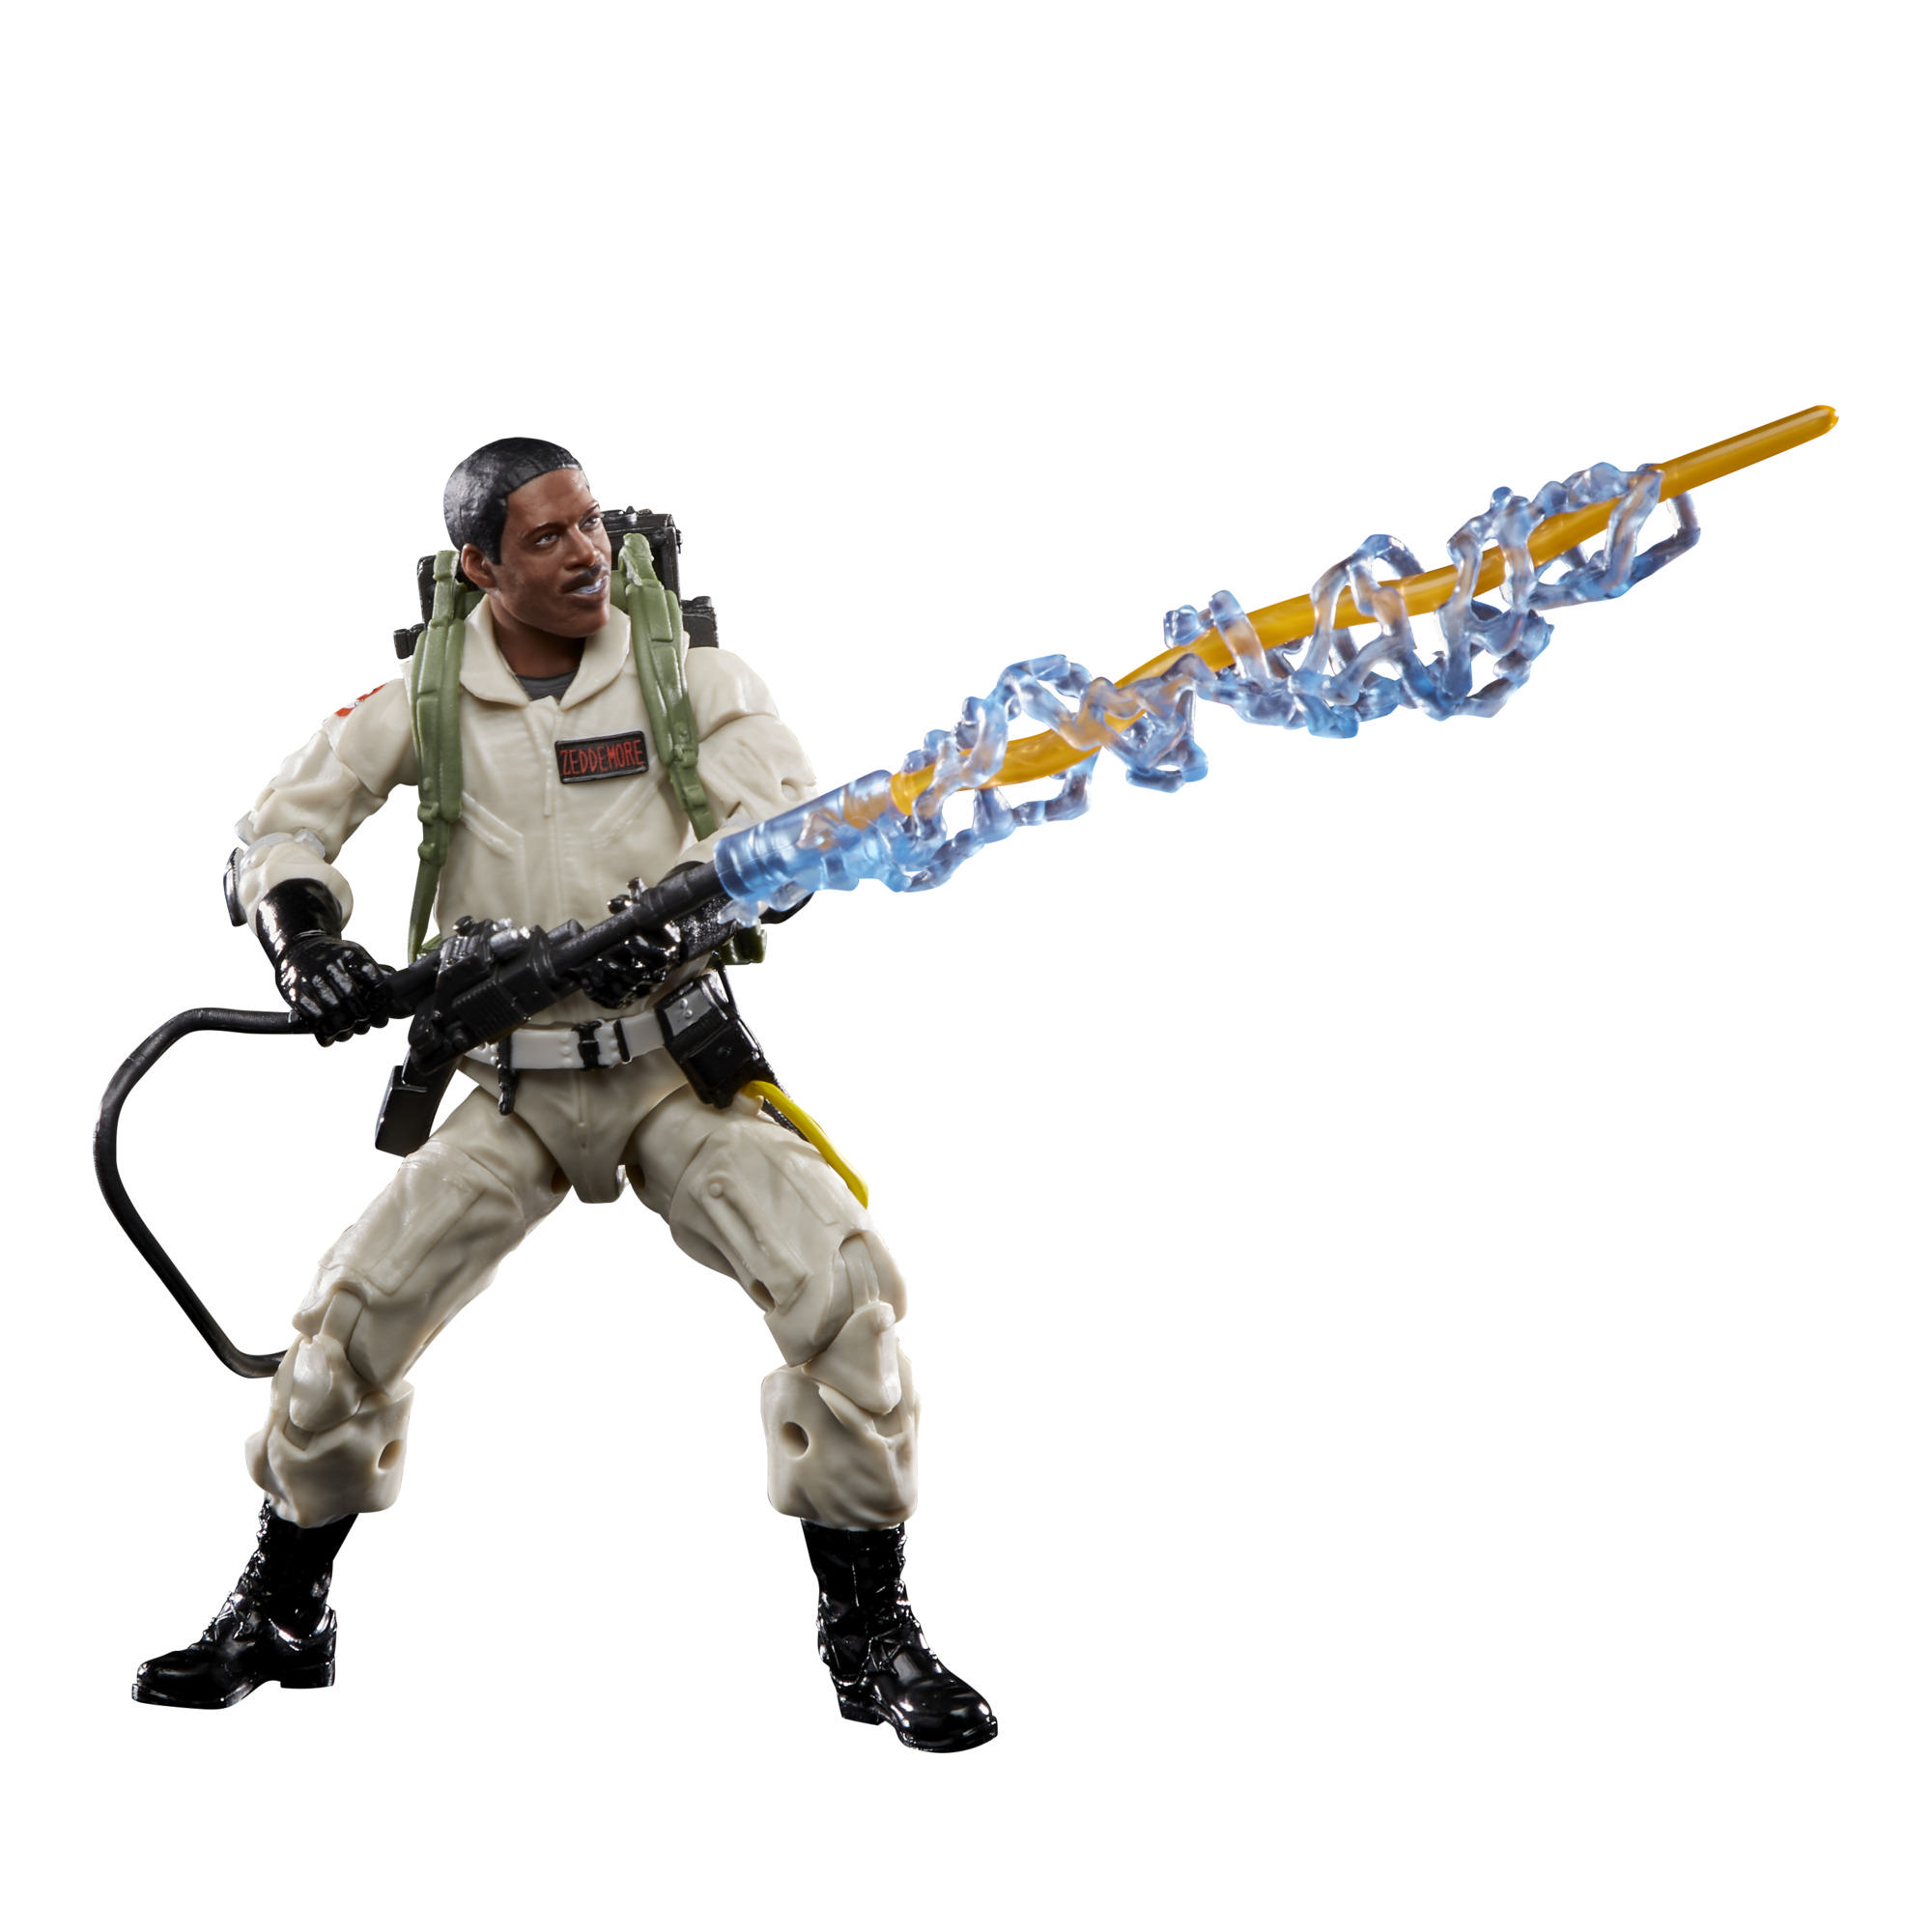 Ghostbusters Plasma Series Winston Zeddemore Toy 6-Inch-Scale Collectible Classic 1984 Ghostbusters Figure, Kids Ages 4 and Up